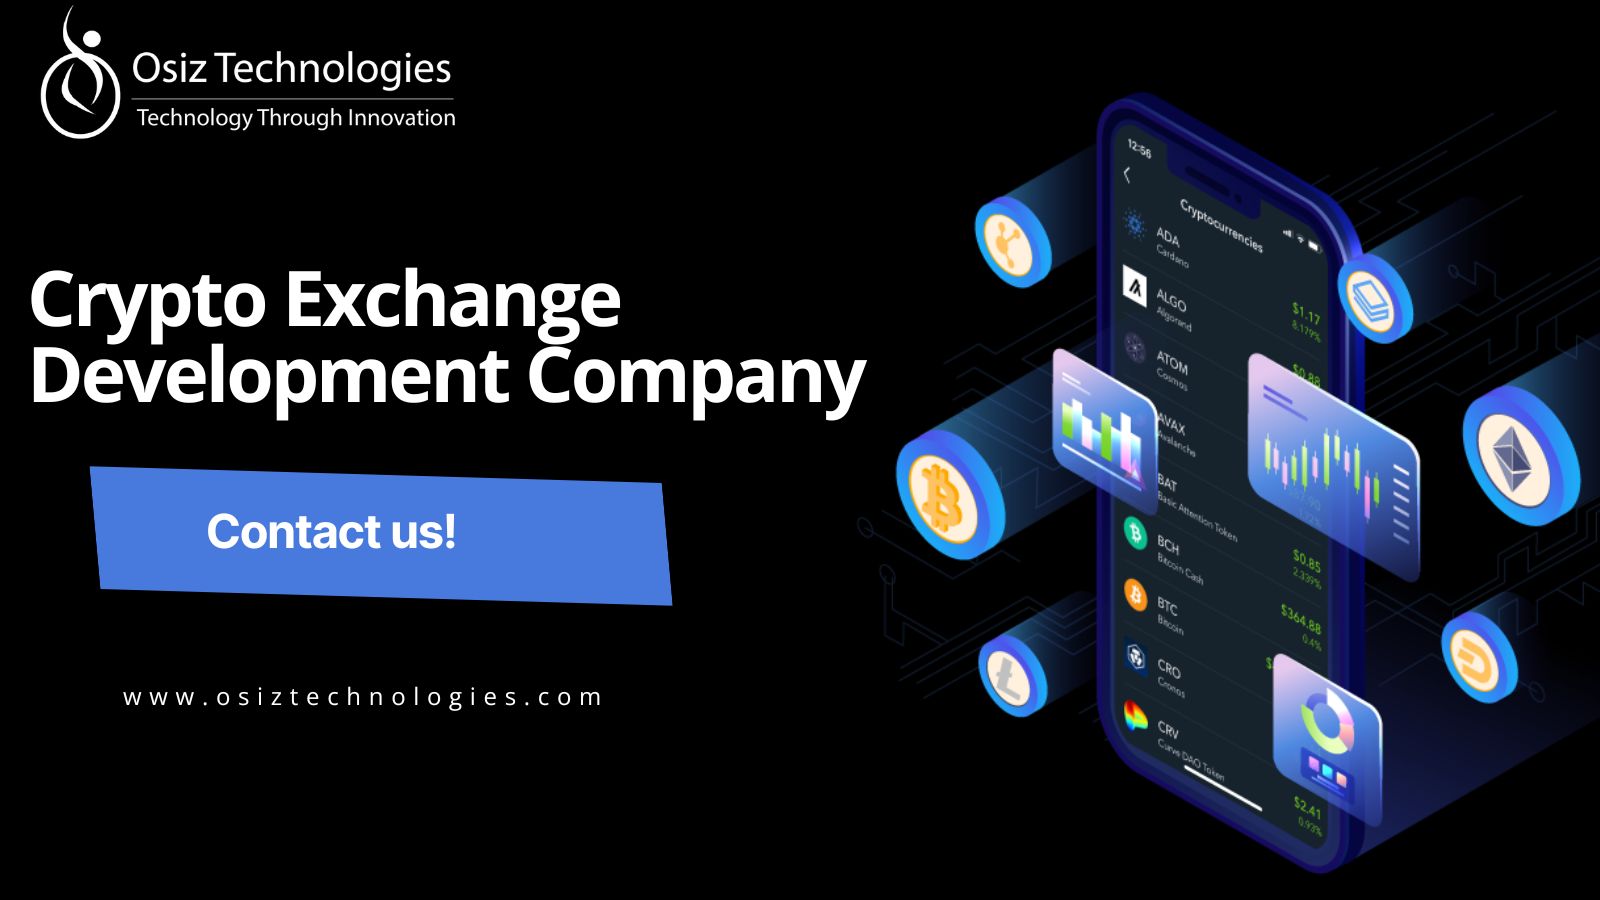 Launch Your Own Crypto Exchange with Osiz Expert Development Services!